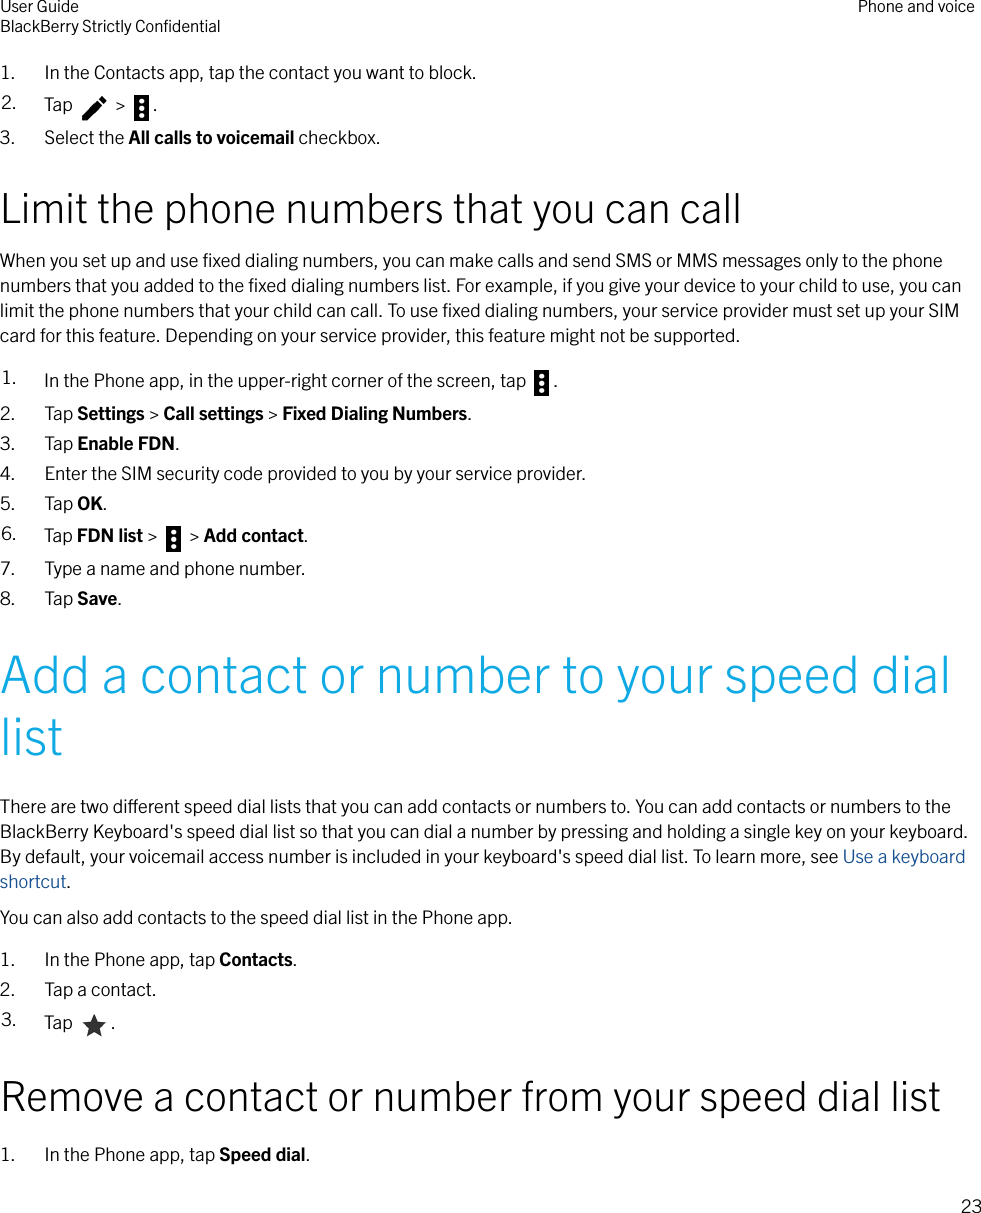 1. In the Contacts app, tap the contact you want to block.2. Tap   &gt;  .3. Select the All calls to voicemail checkbox.Limit the phone numbers that you can callWhen you set up and use ﬁxed dialing numbers, you can make calls and send SMS or MMS messages only to the phonenumbers that you added to the ﬁxed dialing numbers list. For example, if you give your device to your child to use, you canlimit the phone numbers that your child can call. To use ﬁxed dialing numbers, your service provider must set up your SIMcard for this feature. Depending on your service provider, this feature might not be supported.1. In the Phone app, in the upper-right corner of the screen, tap  .2. Tap Settings &gt; Call settings &gt; Fixed Dialing Numbers.3. Tap Enable FDN.4. Enter the SIM security code provided to you by your service provider.5. Tap OK.6. Tap FDN list &gt;   &gt; Add contact.7. Type a name and phone number.8. Tap Save.Add a contact or number to your speed diallistThere are two dierent speed dial lists that you can add contacts or numbers to. You can add contacts or numbers to theBlackBerry Keyboard&apos;s speed dial list so that you can dial a number by pressing and holding a single key on your keyboard.By default, your voicemail access number is included in your keyboard&apos;s speed dial list. To learn more, see Use a keyboardshortcut.You can also add contacts to the speed dial list in the Phone app.1. In the Phone app, tap Contacts.2. Tap a contact.3. Tap  .Remove a contact or number from your speed dial list1. In the Phone app, tap Speed dial.User GuideBlackBerry Strictly ConﬁdentialPhone and voice23